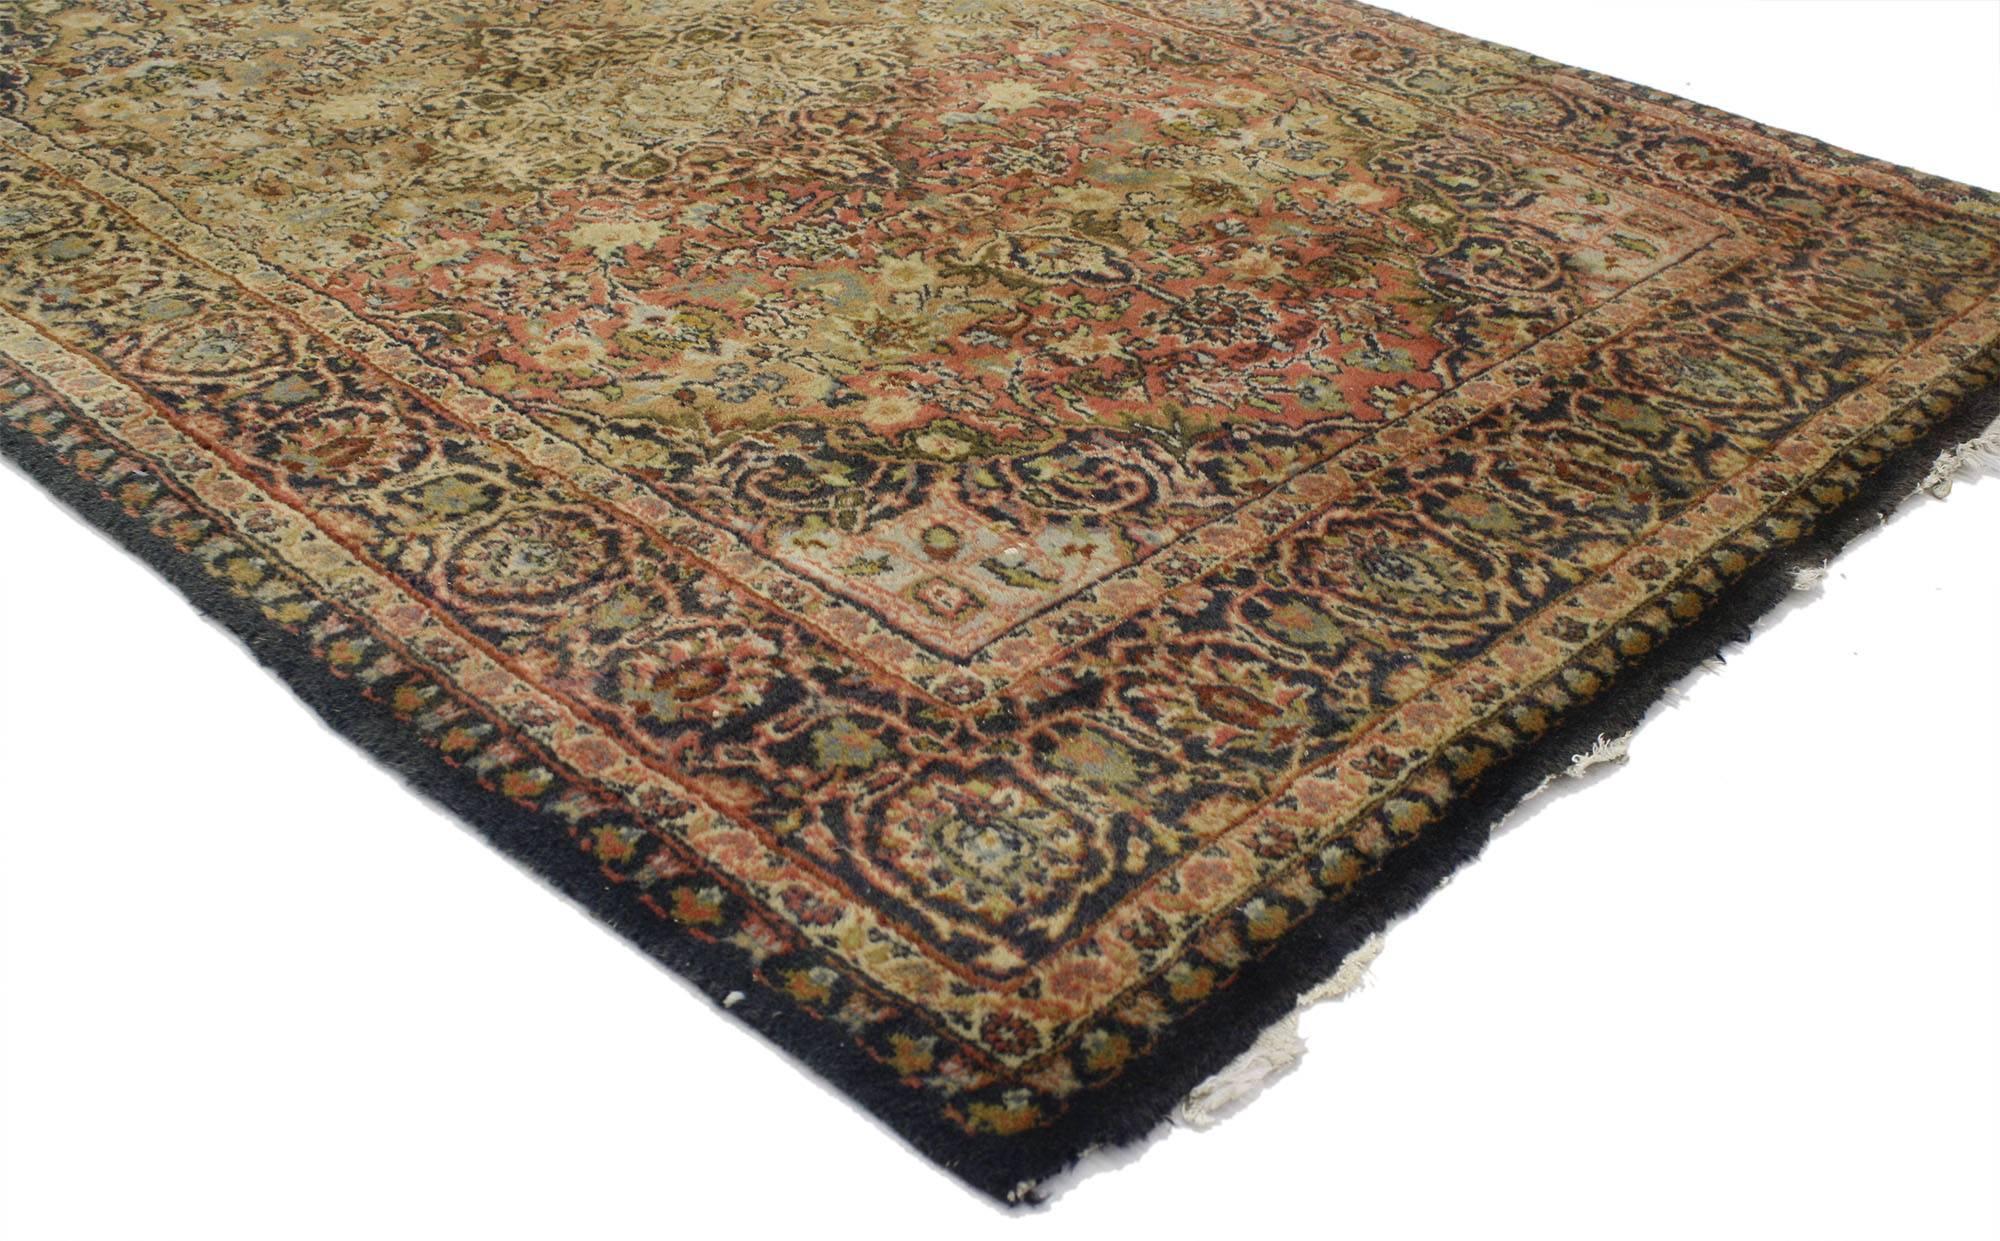 77080, vintage Persian Kashan Accent rug with Spanish Colonial style. This hand knotted wool vintage Persian Kashan accent rug features a cusped lozenge medallion flanked with a palmette pendant on either side surrounded by an all-over floral